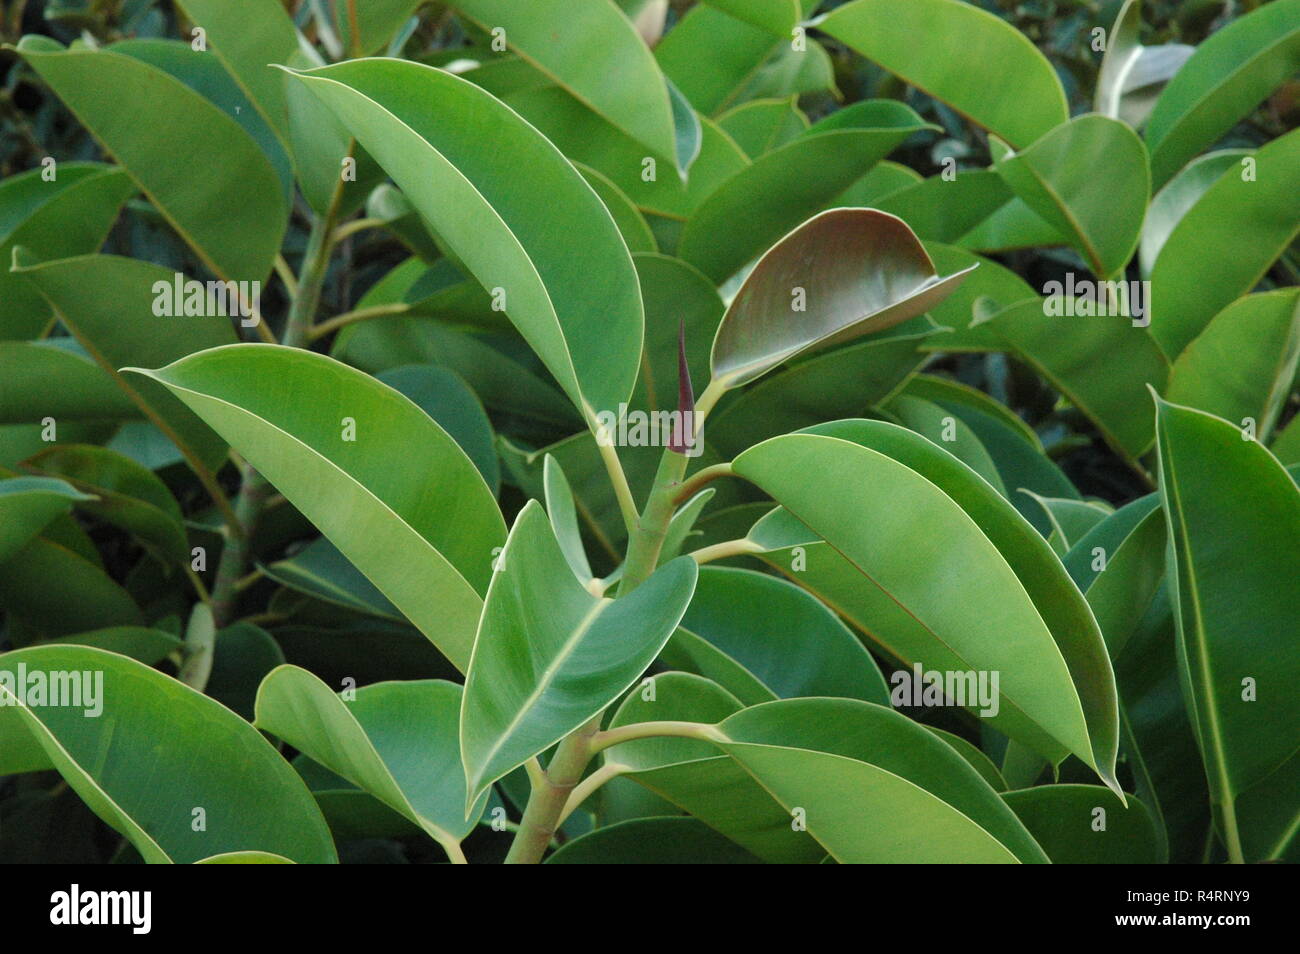 green leaves from the rubber tree in spain,costa blanca Stock Photo